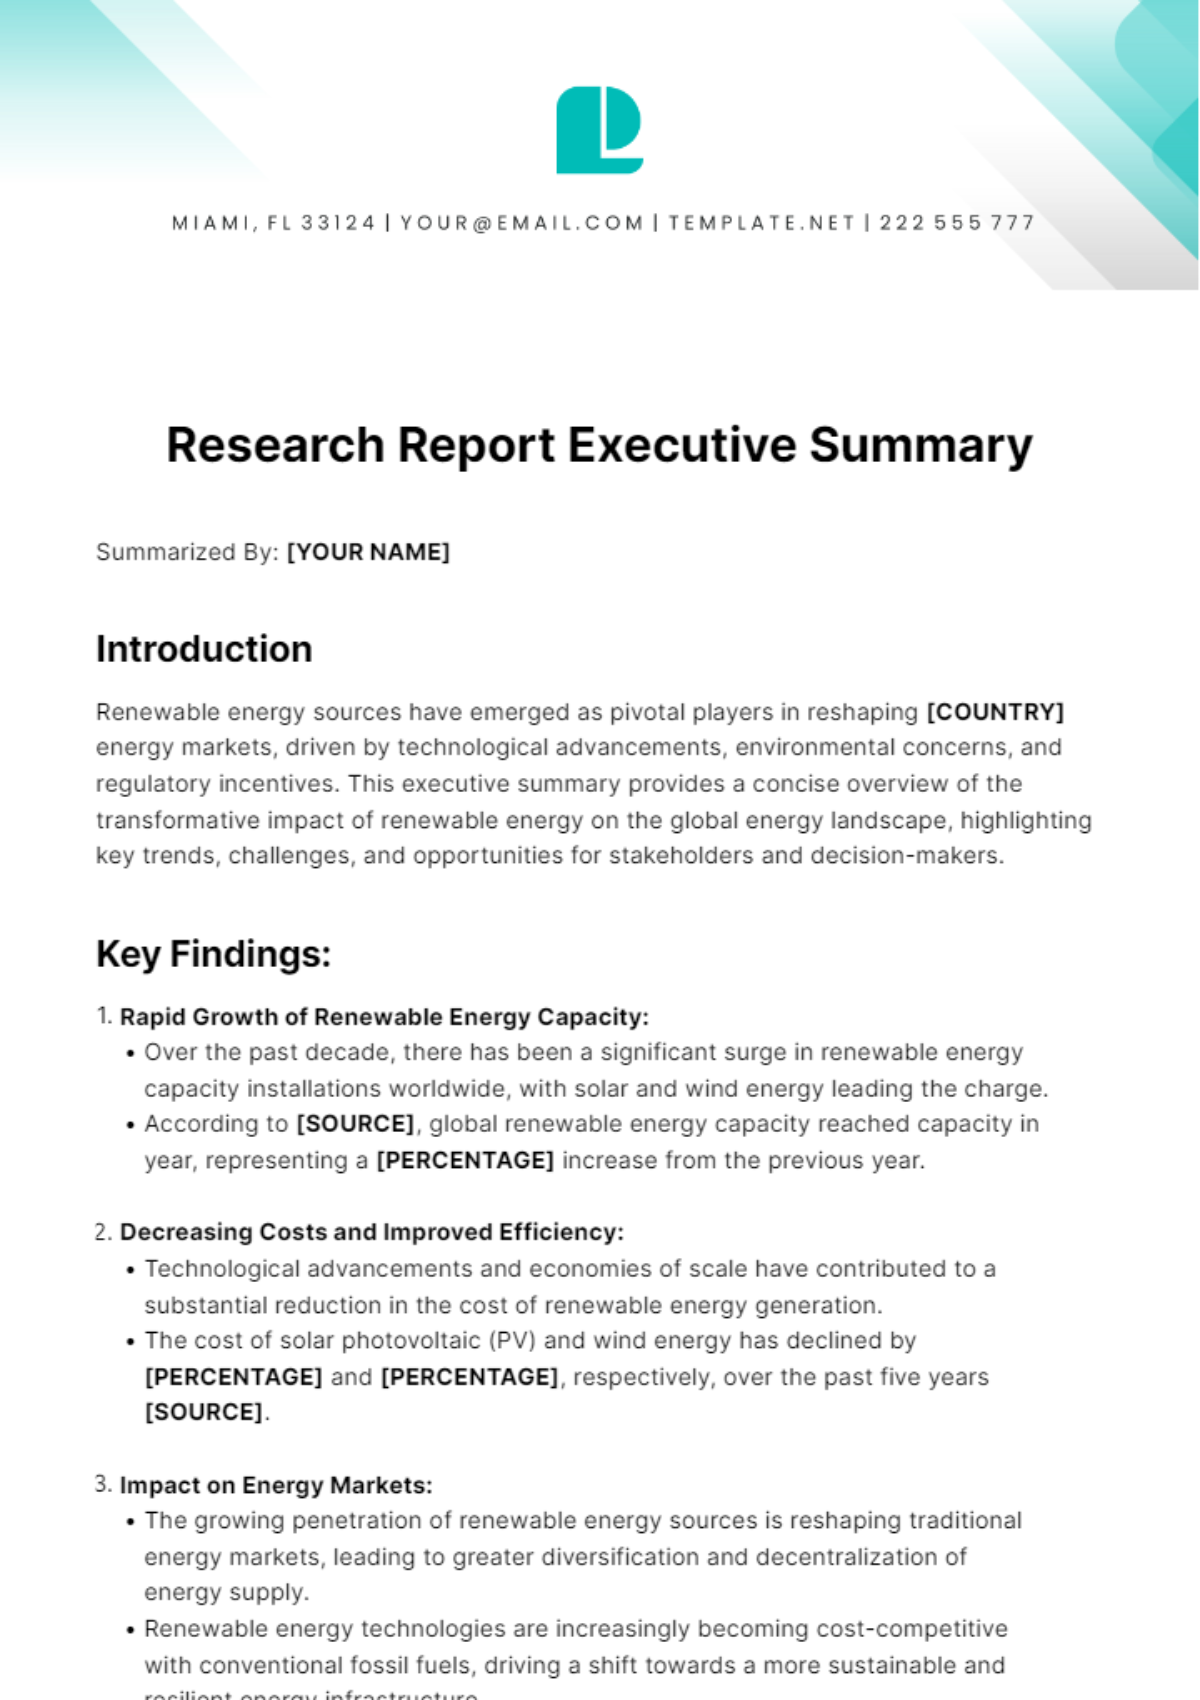 Research Report Executive Summary Template